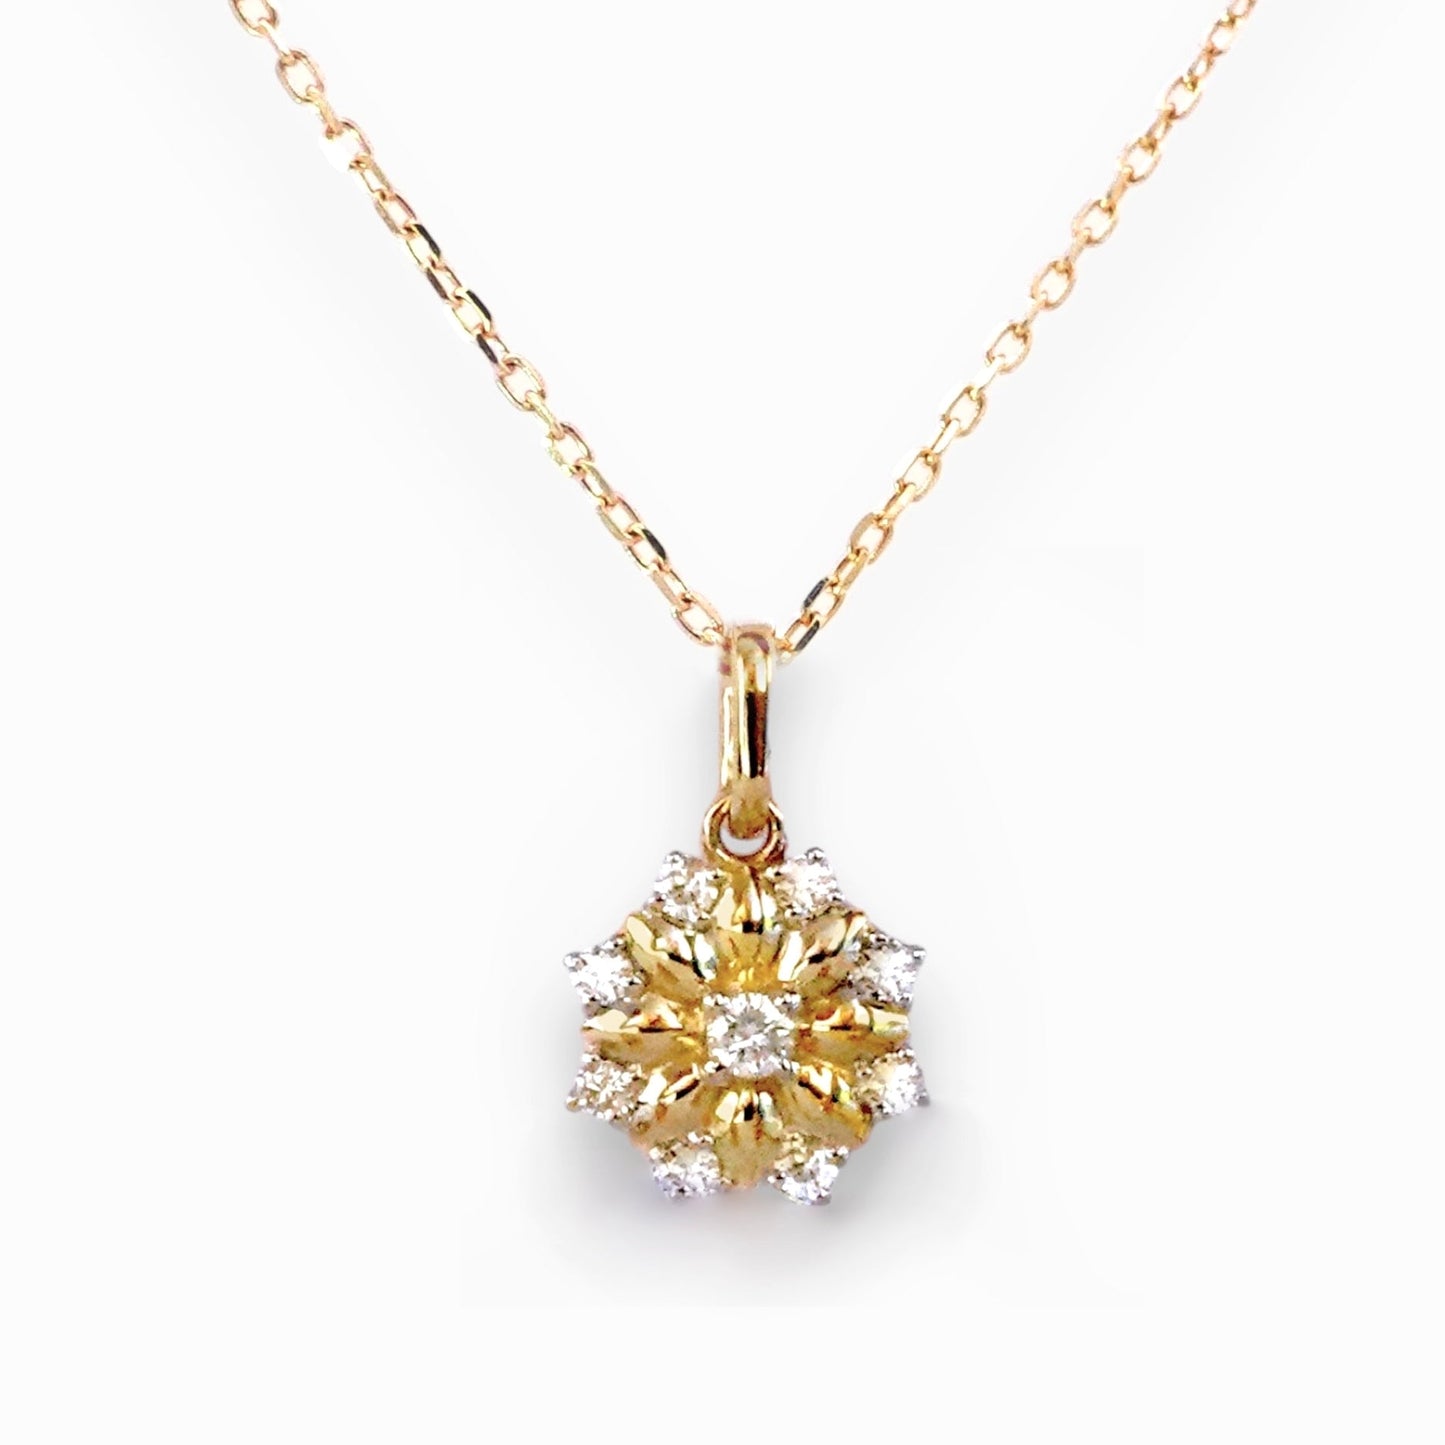 Cleo Necklace in Diamond - 18k Gold - Lynor